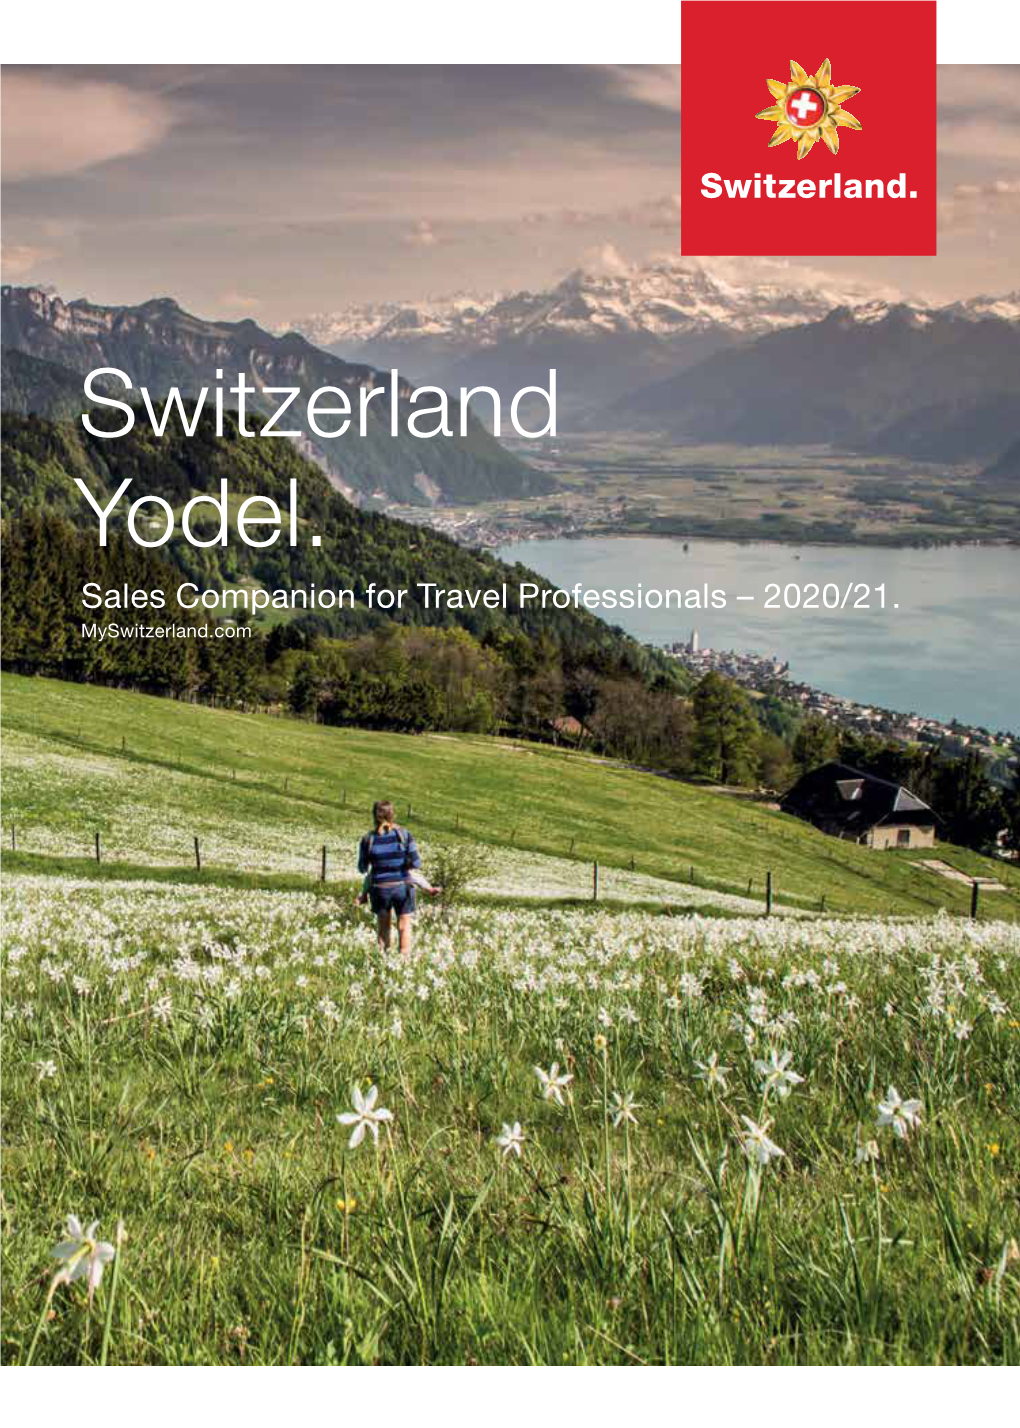 Switzerland Yodel. Sales Companion for Travel Professionals – 2020/21